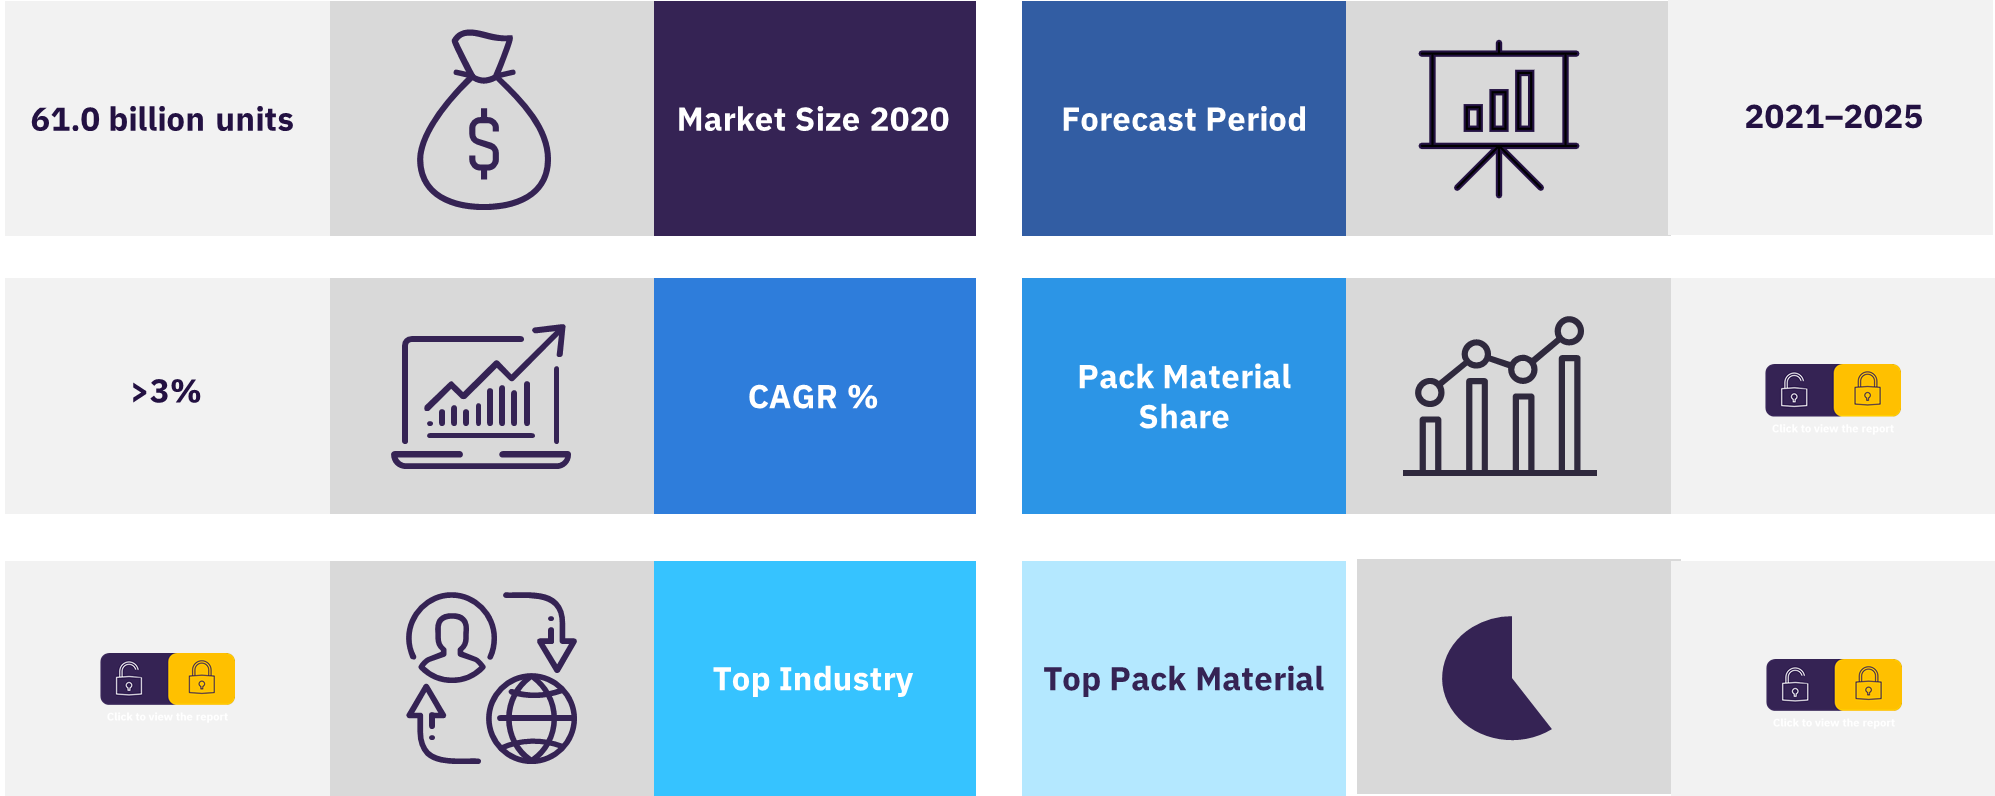 Overview of the packaging market in the Philippines